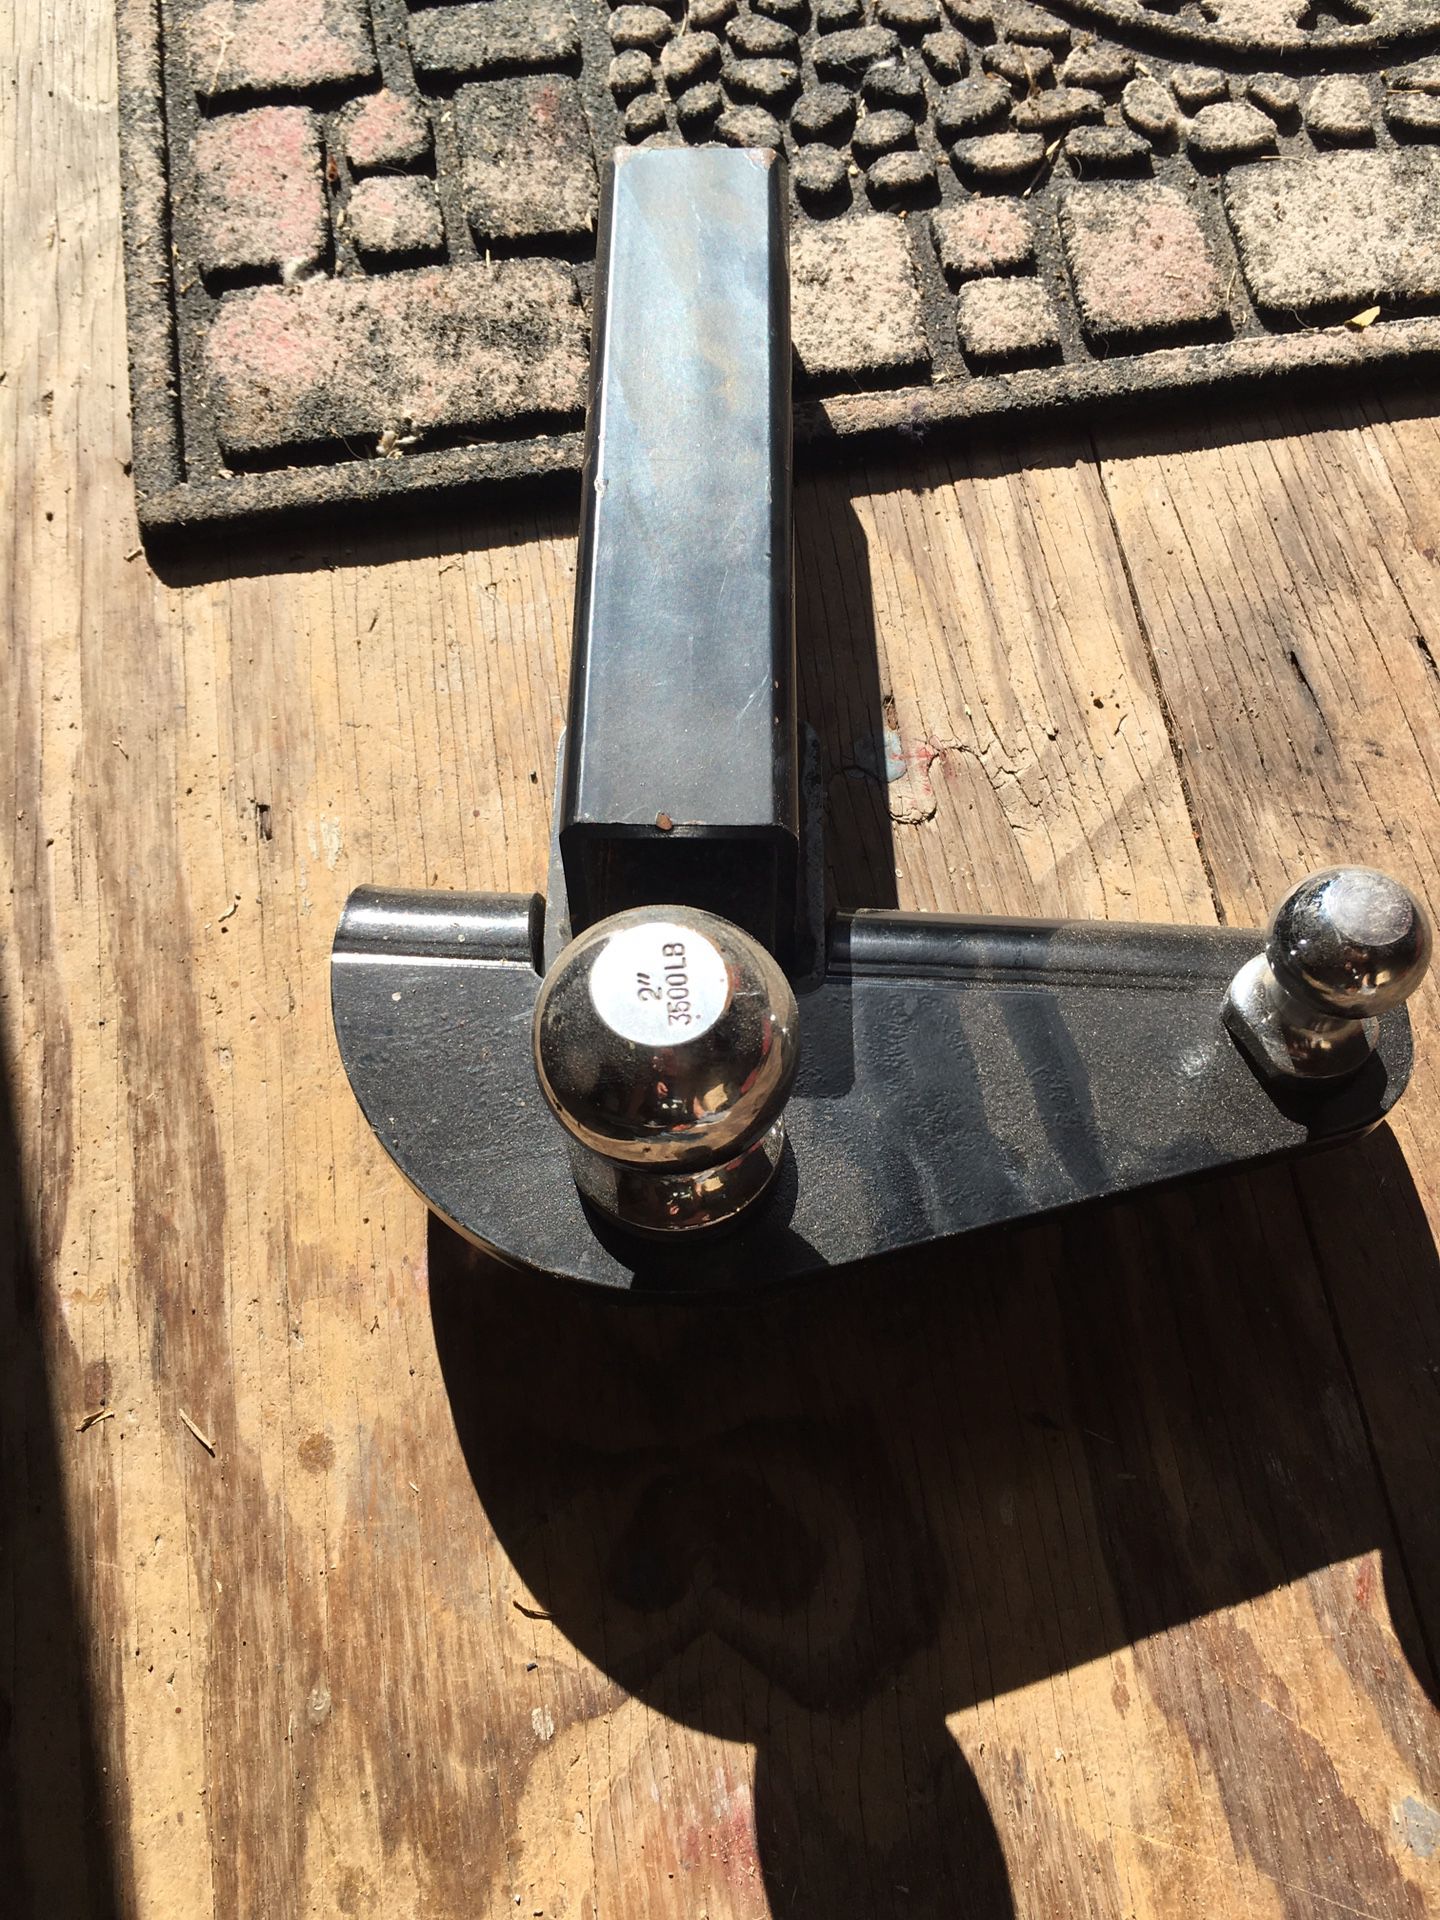 Trailer hitch with sway bar ball